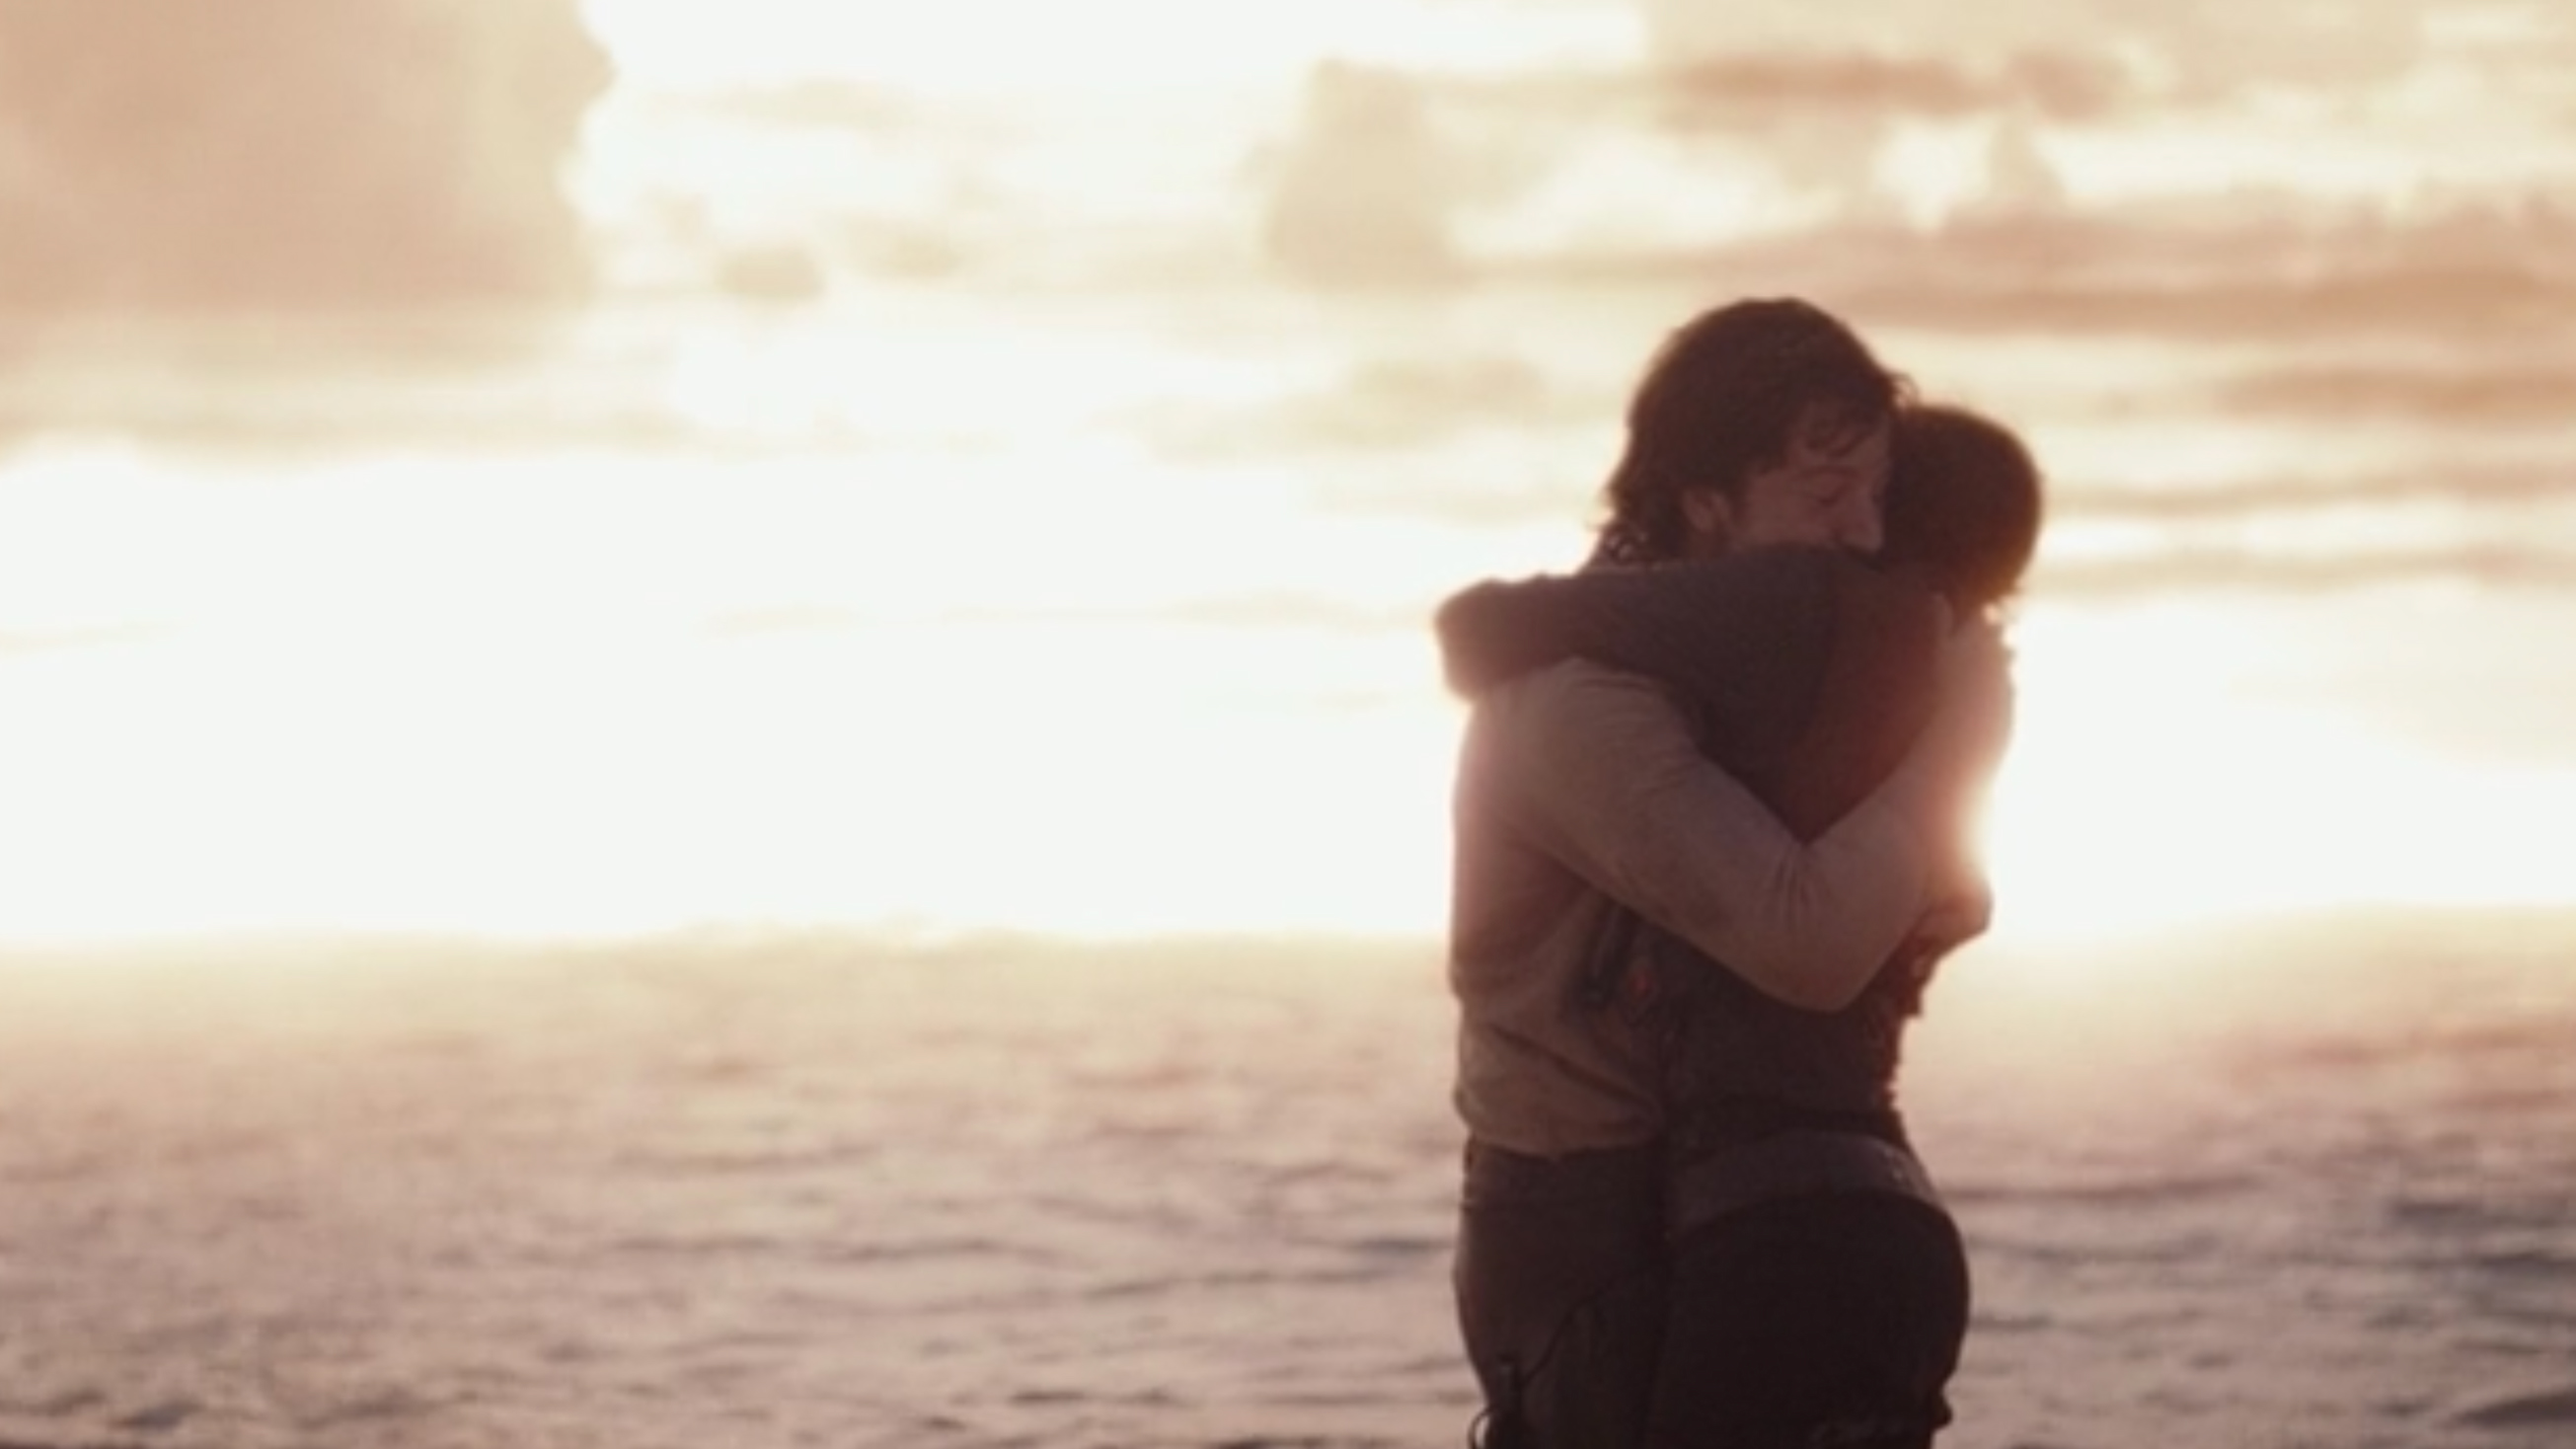 Cassian Andor and Jyn Erso embrace.